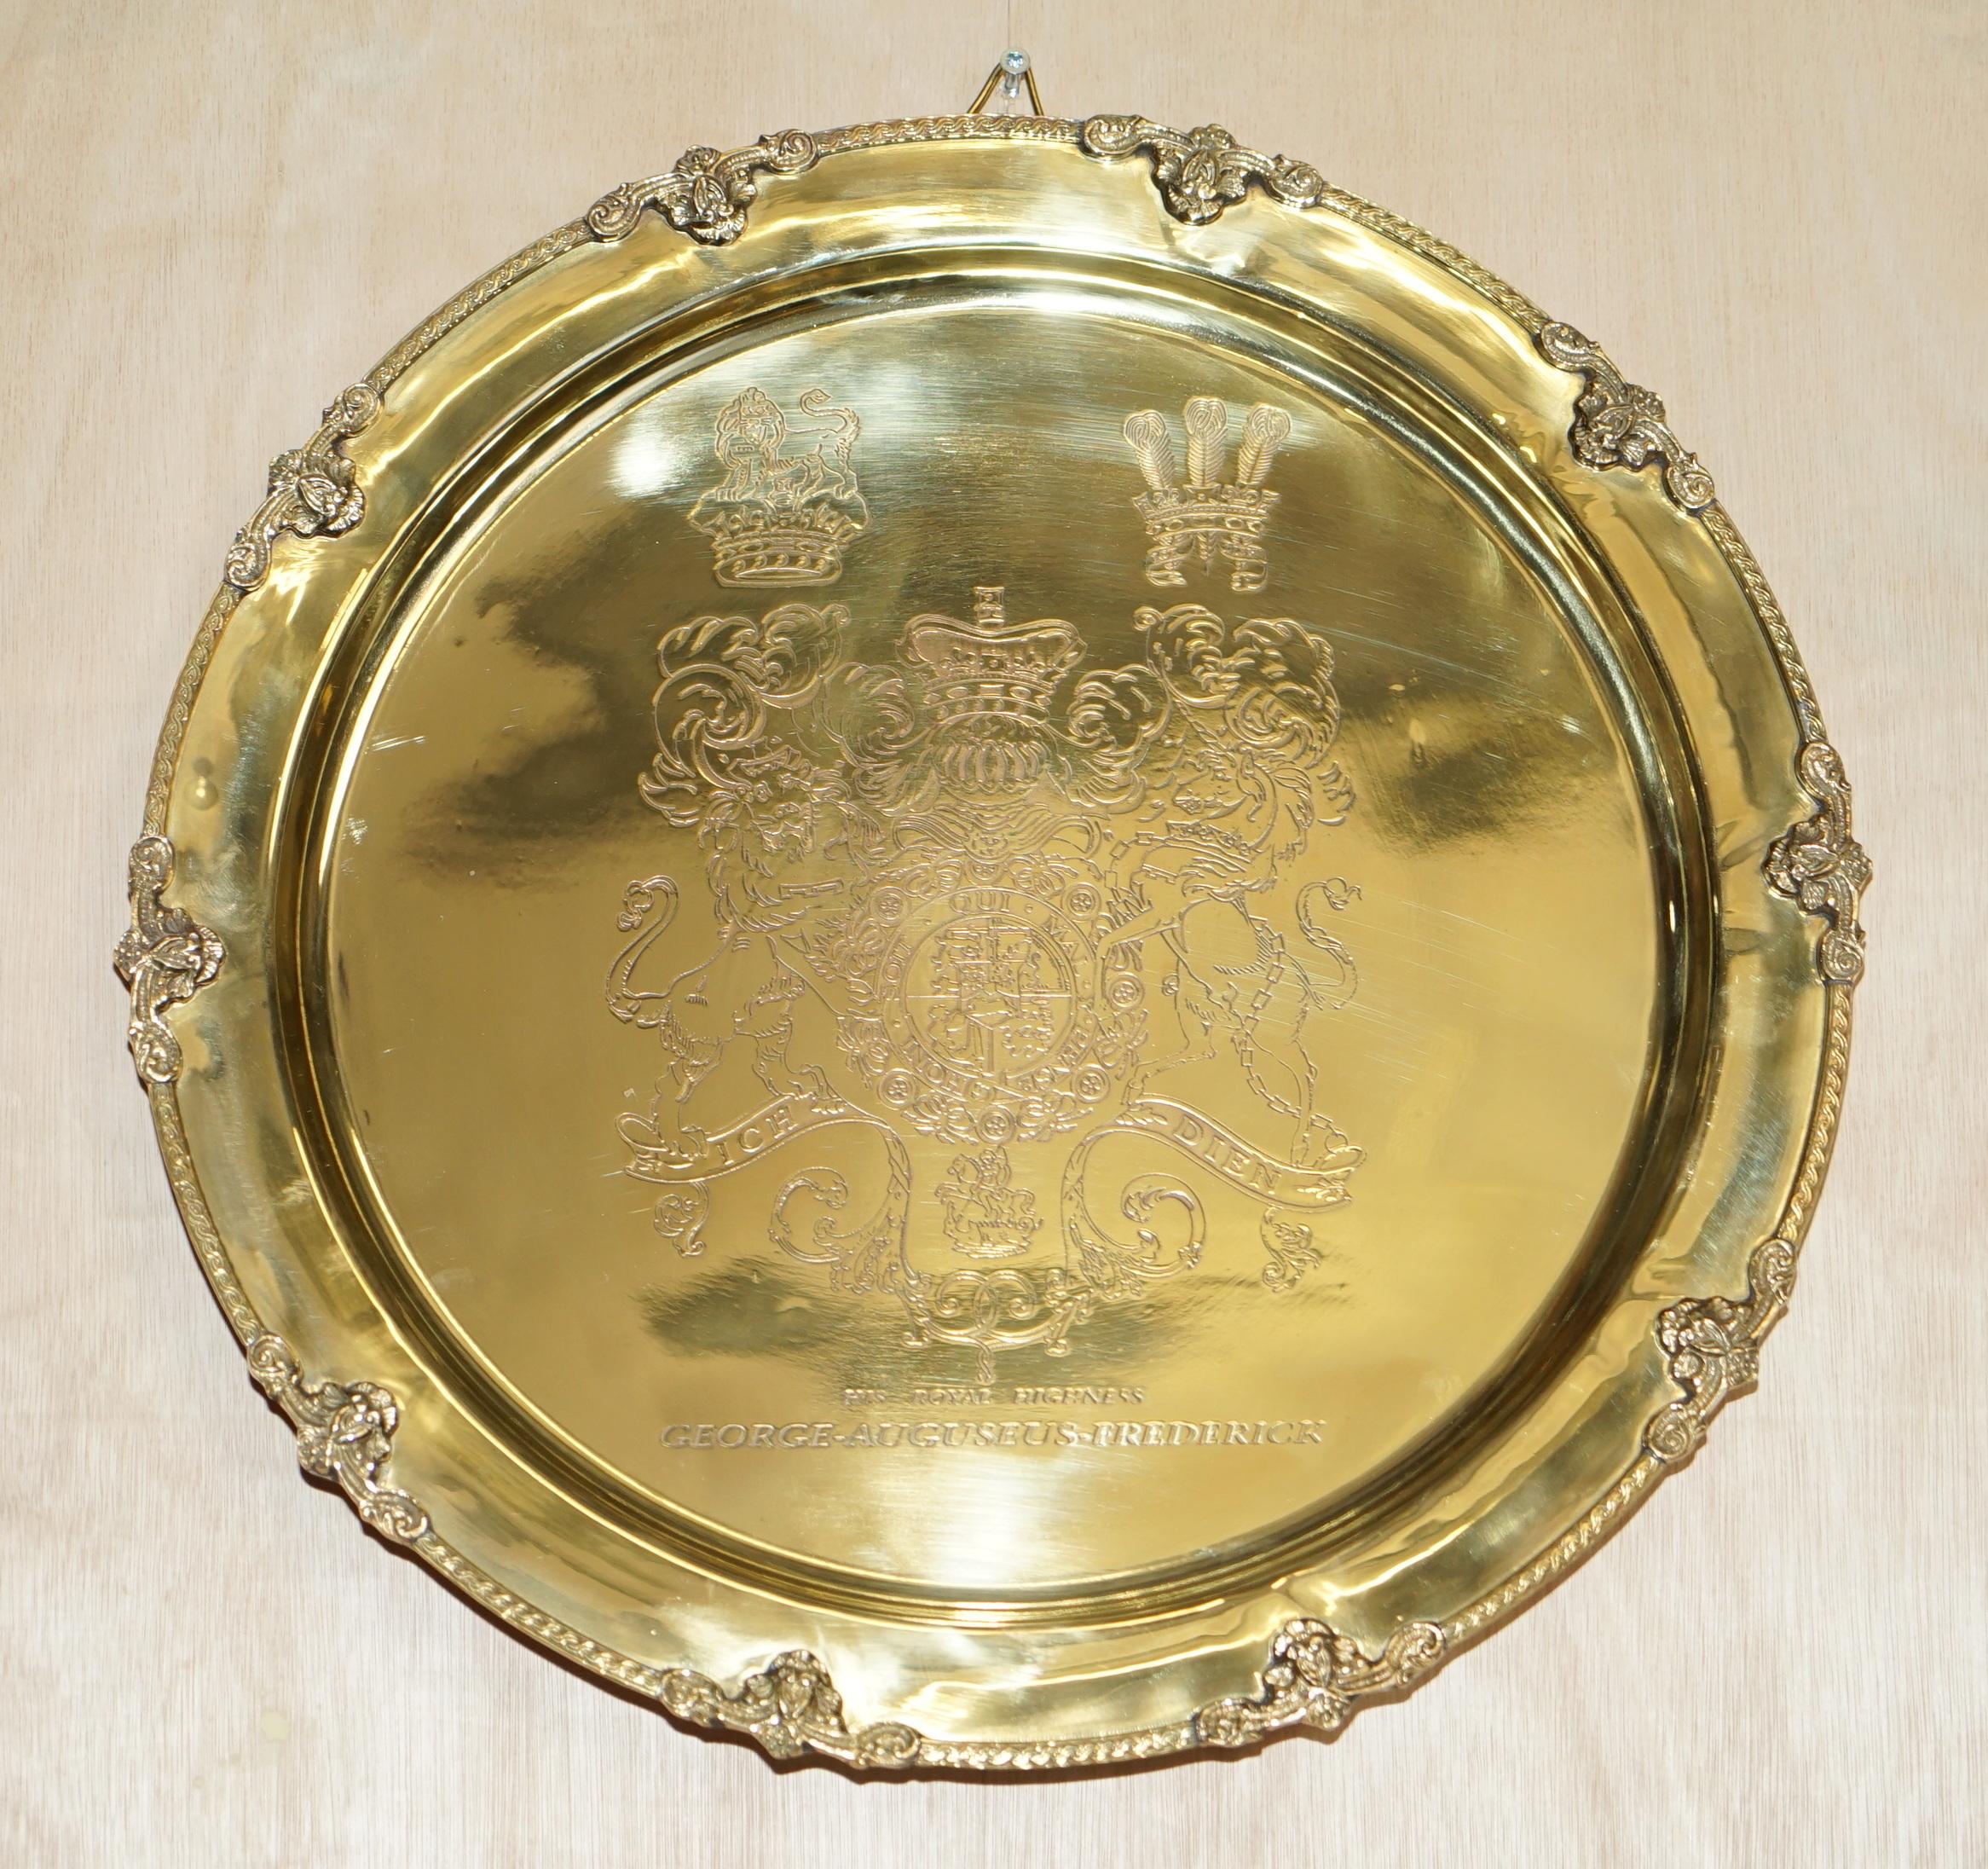 1 of 4 King George Auguseue Frederick Arms Gilt Sterling Silver Plated Trays For Sale 1